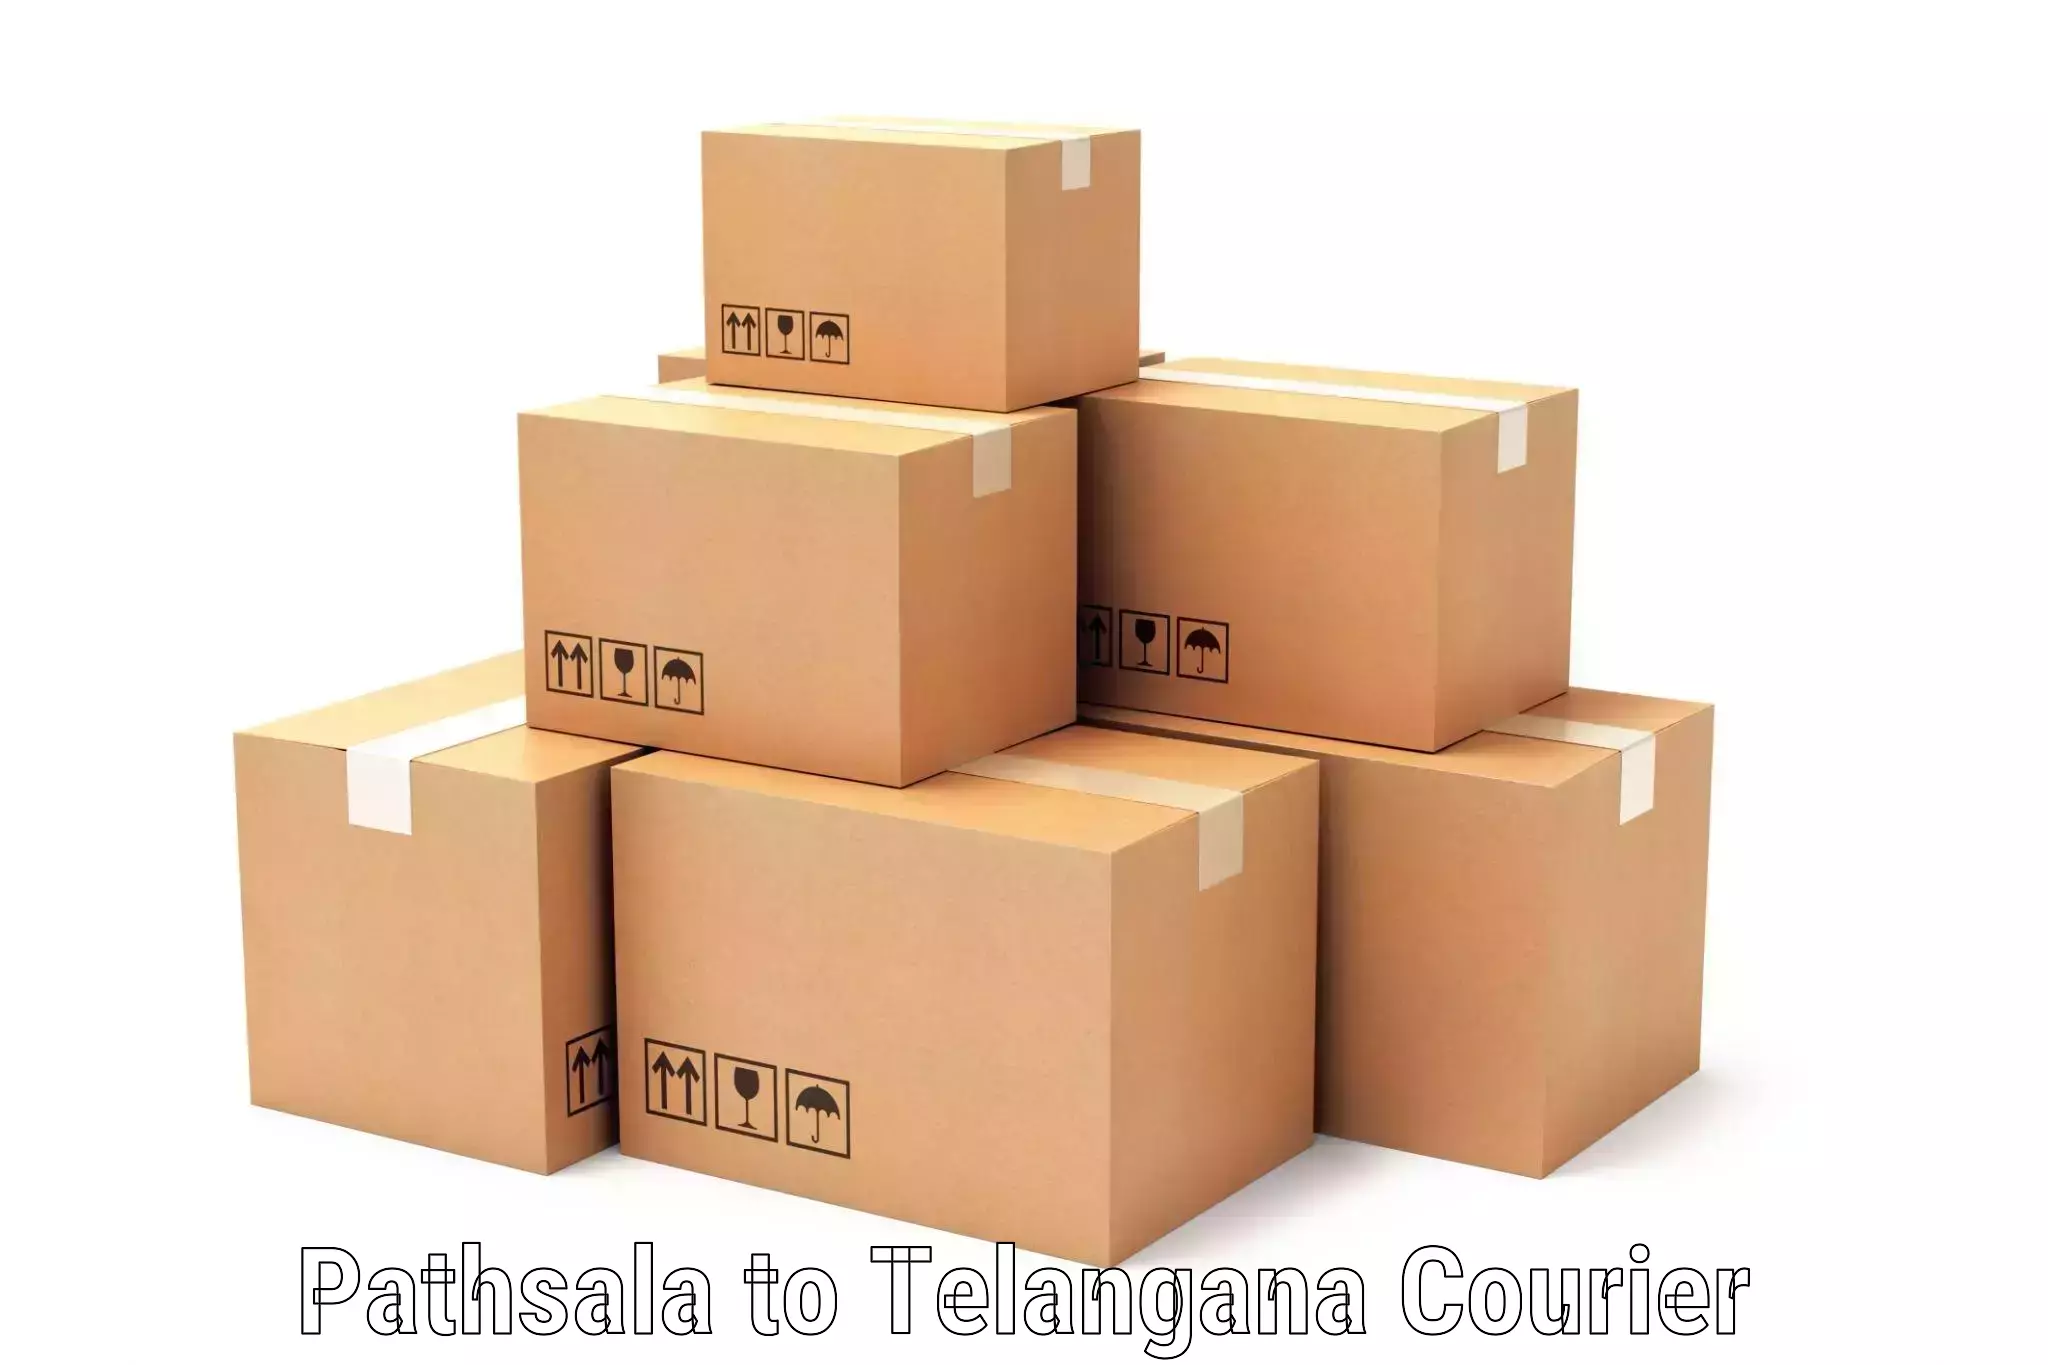 On-demand courier in Pathsala to Kothagudem